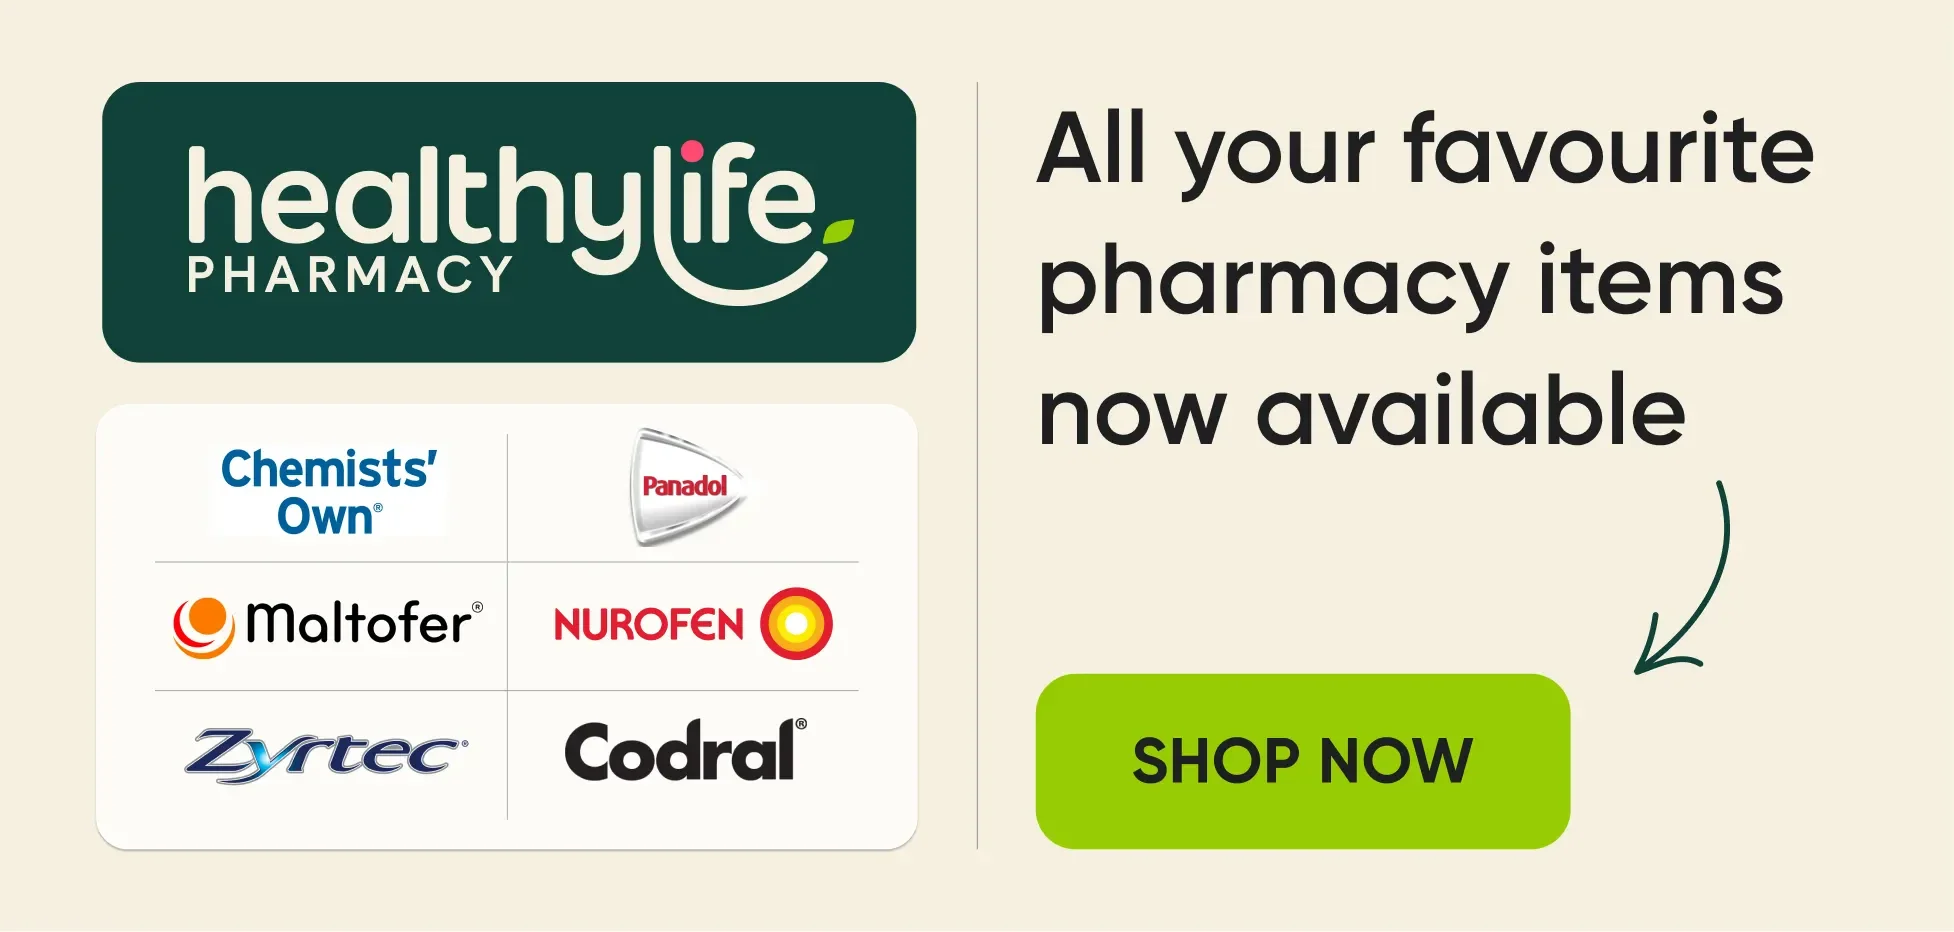 Healthylife Pharmacy: Chemists' Own. Maltofer. Panado. Nurofen. Zyrtec. Codral. All your favourite pharmacy products now available. Shop now.